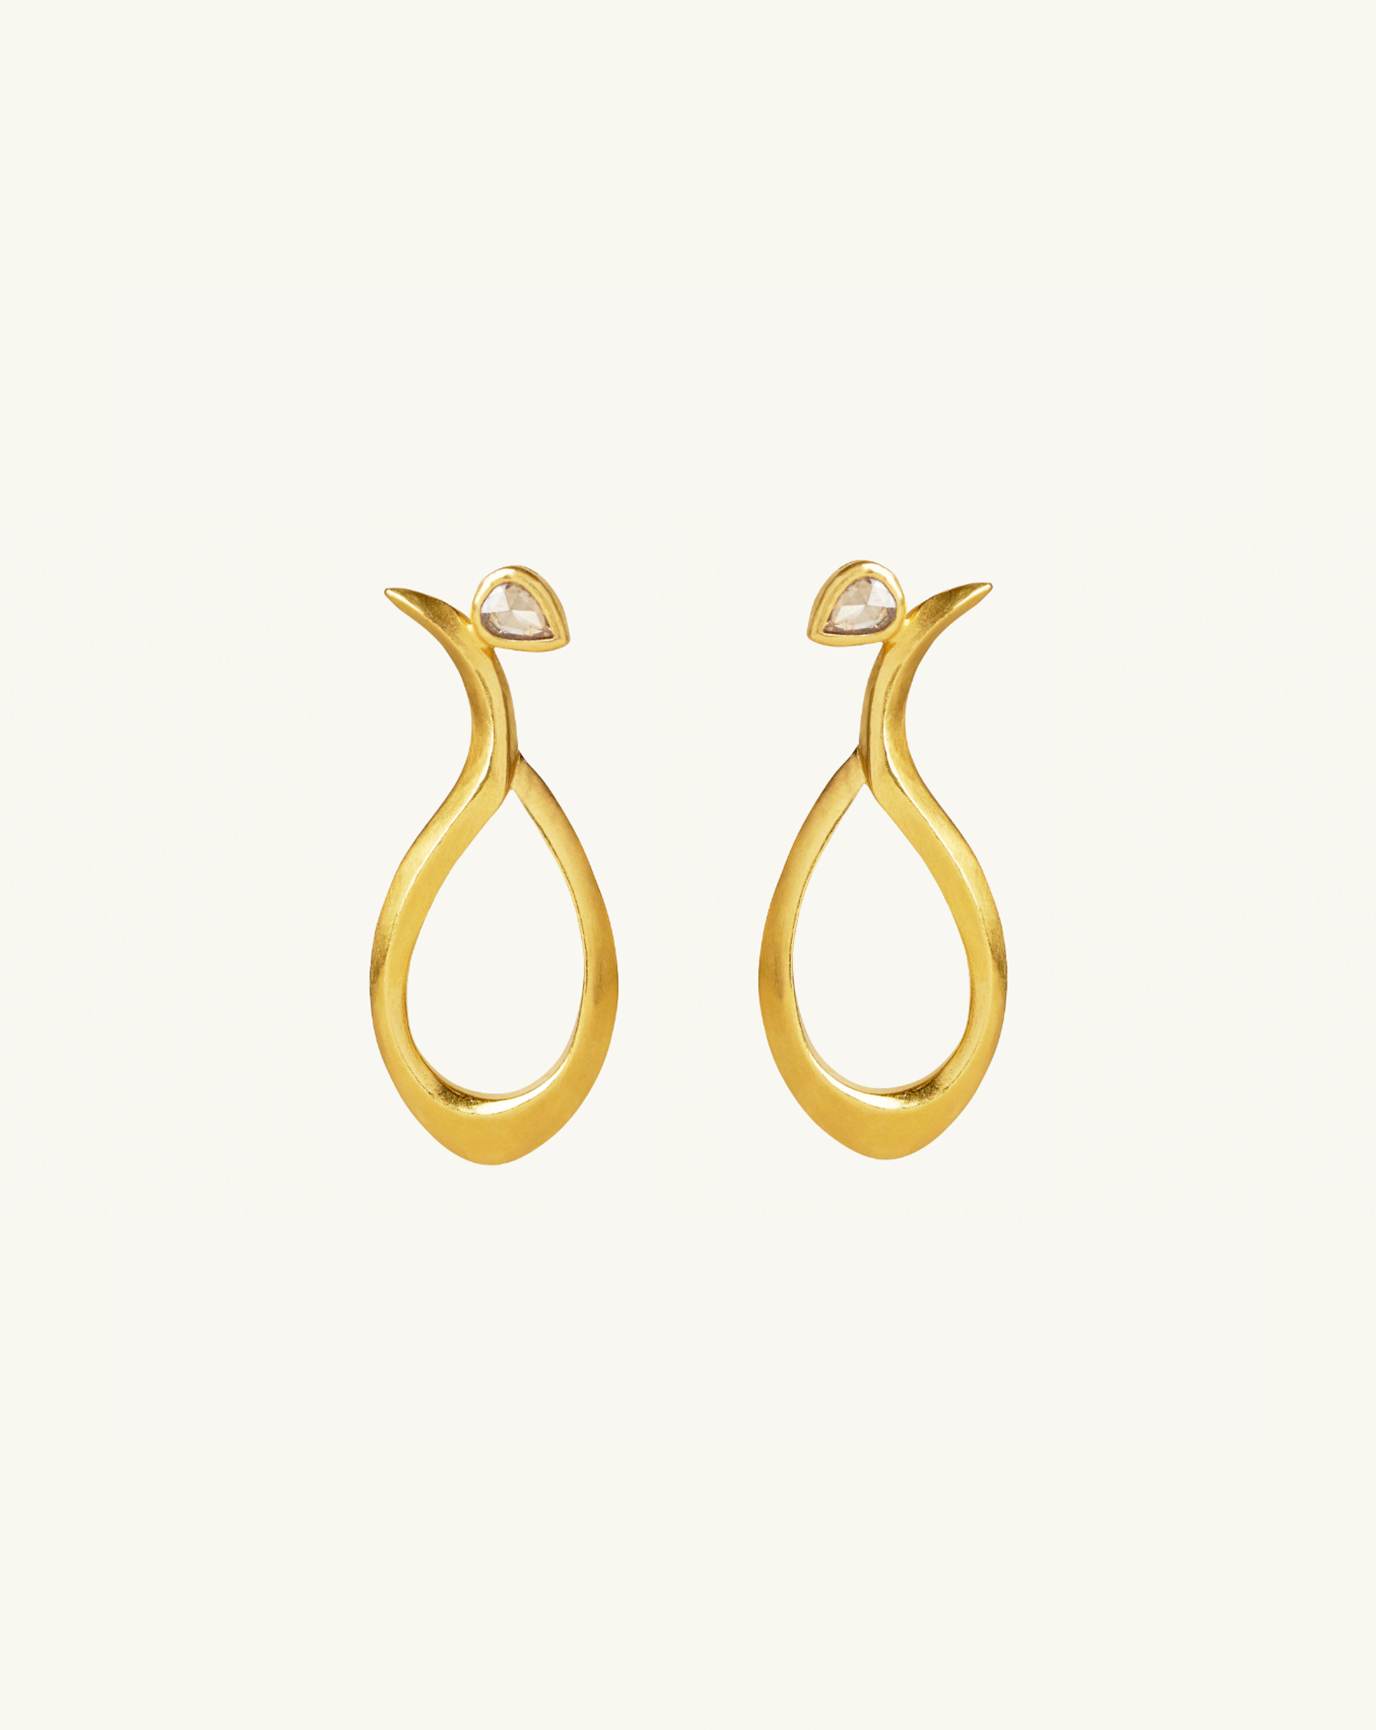 Product image of the large sculptural earrings with small white diamonds